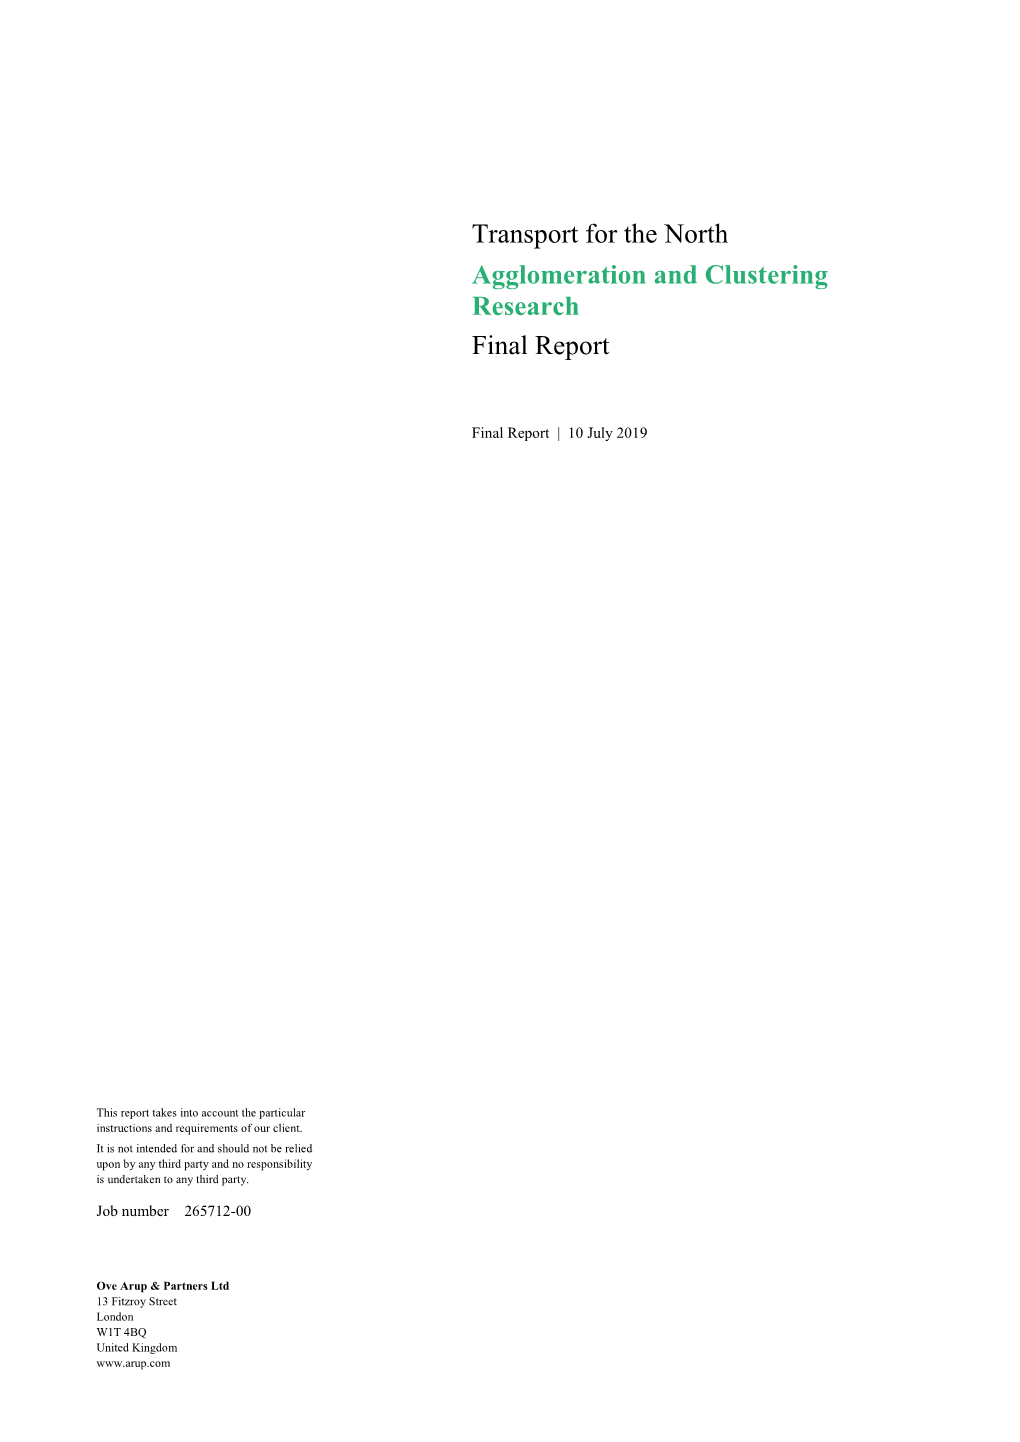 Transport for the North Agglomeration and Clustering Research Final Report